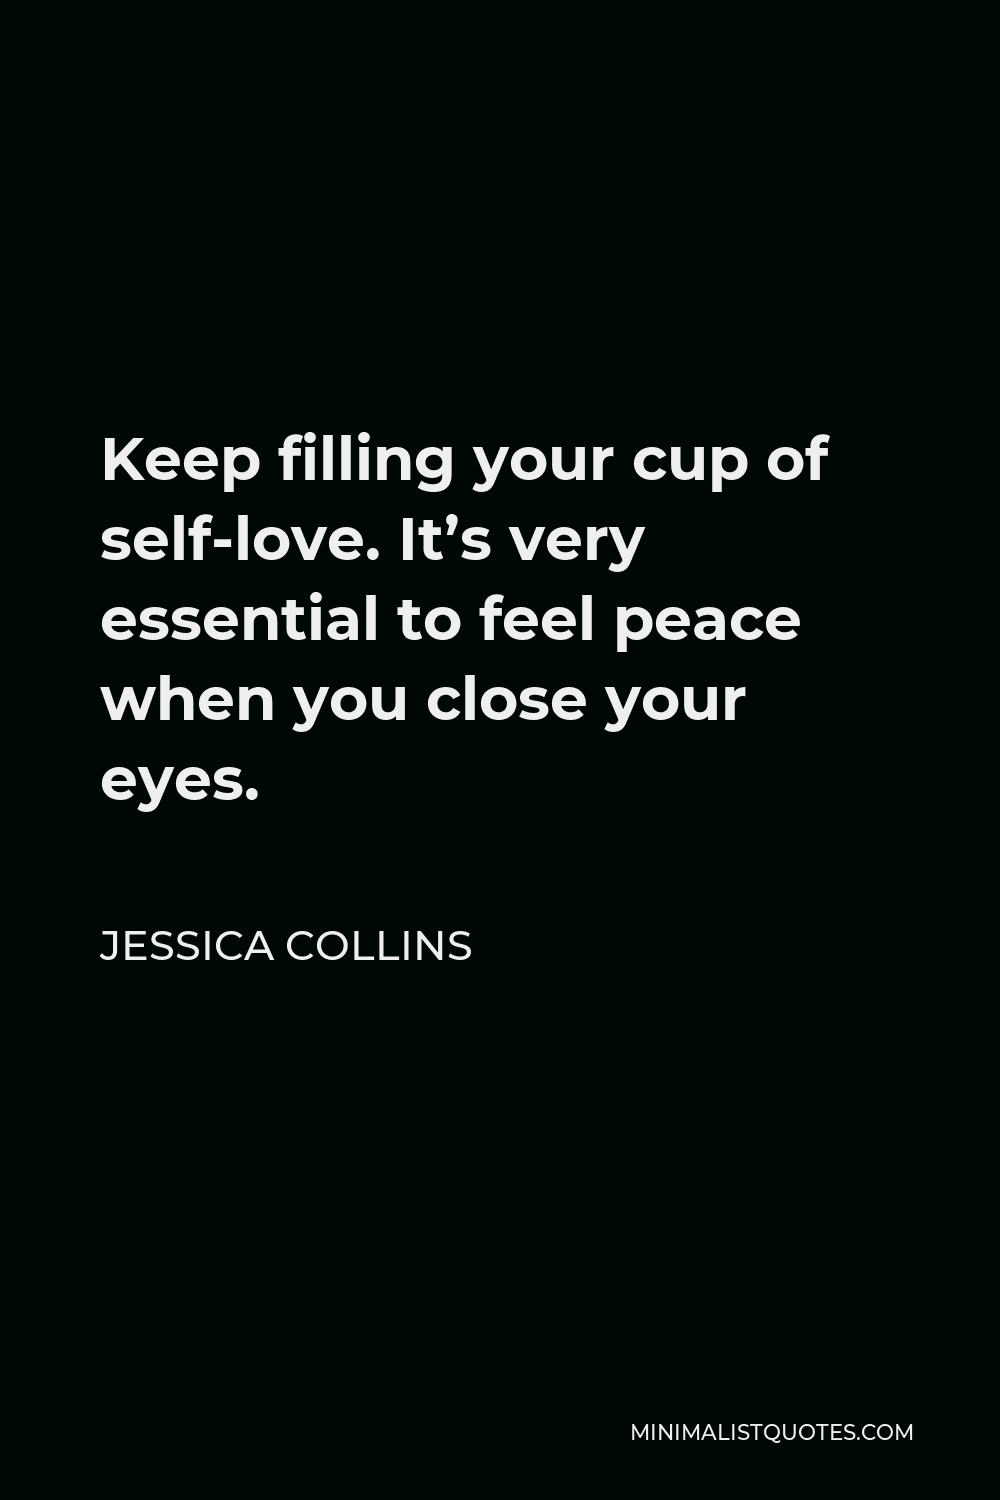 Jessica Collins Quote - Keep filling your cup of self-love. It’s very essential to feel peace when you close your eyes.